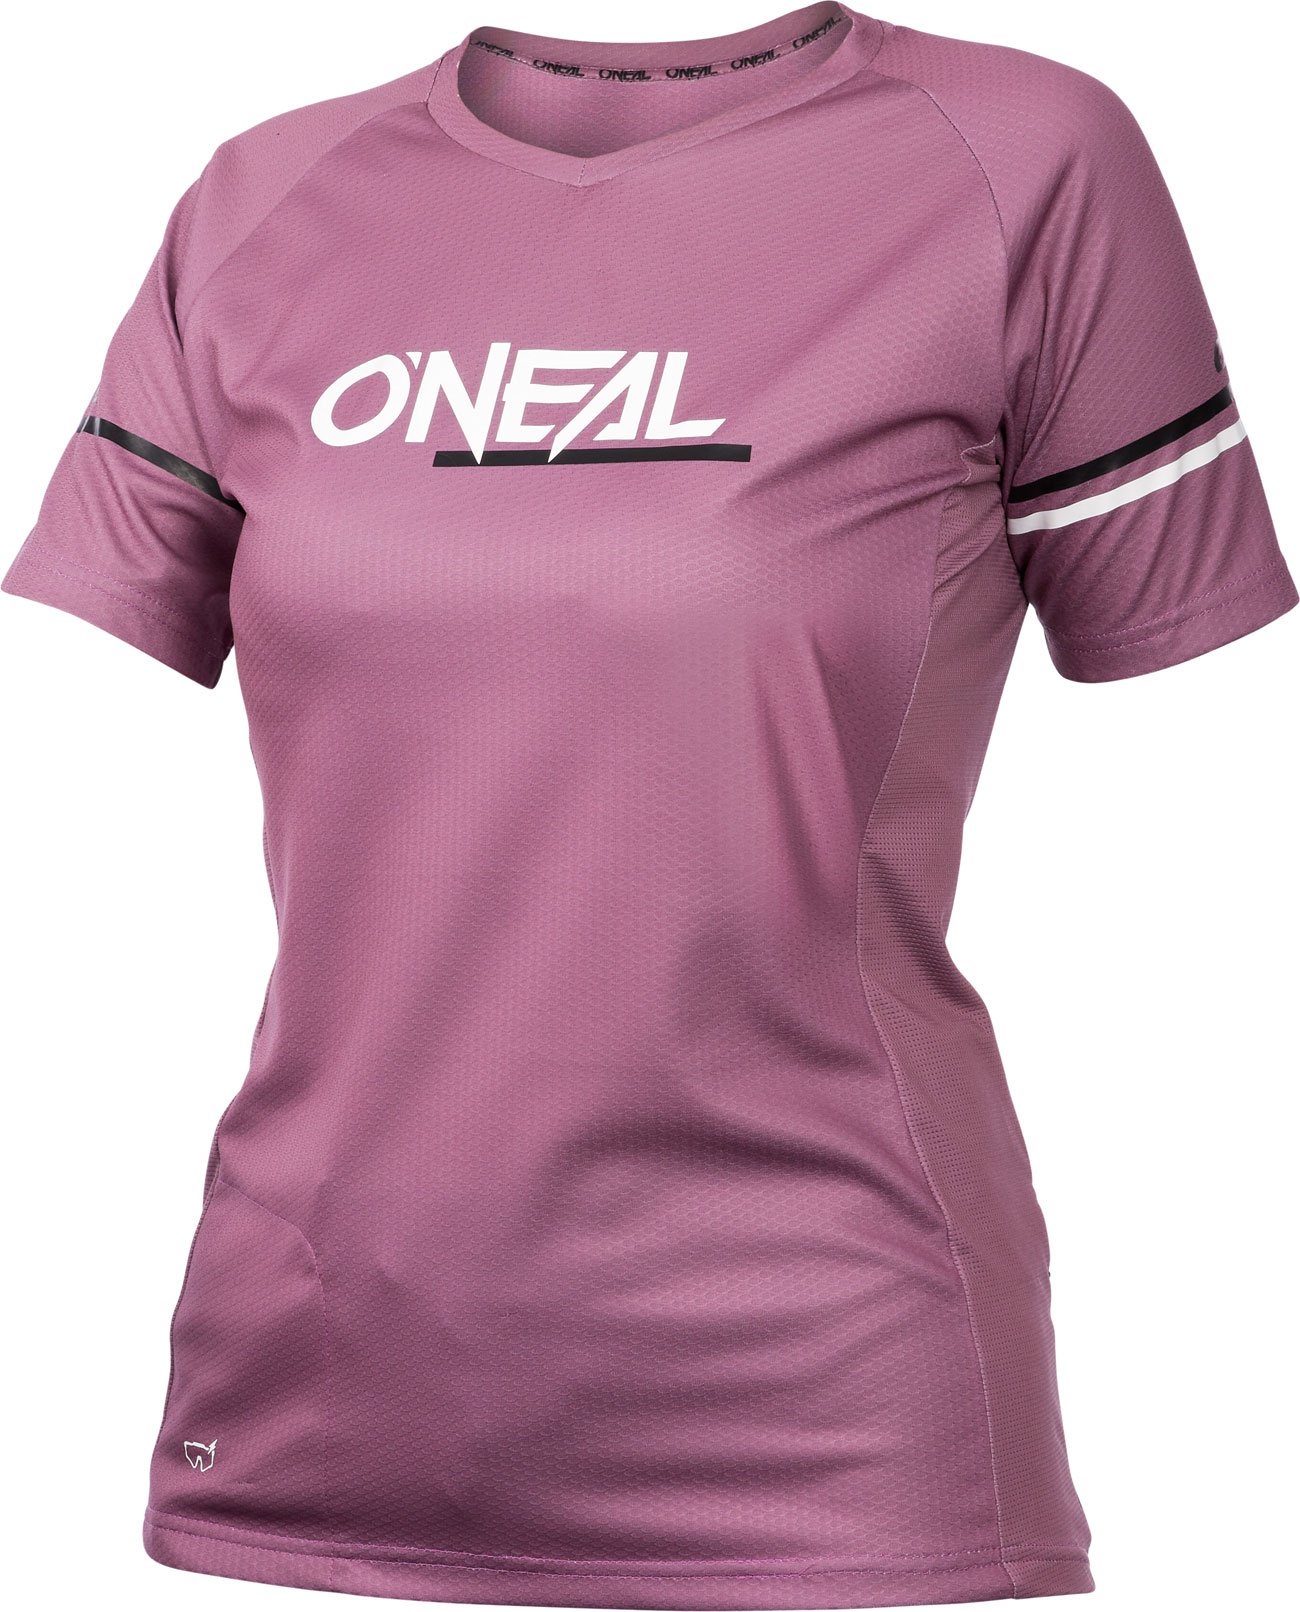 ONeal Soul S23, maillot femme - Fuchsia - L